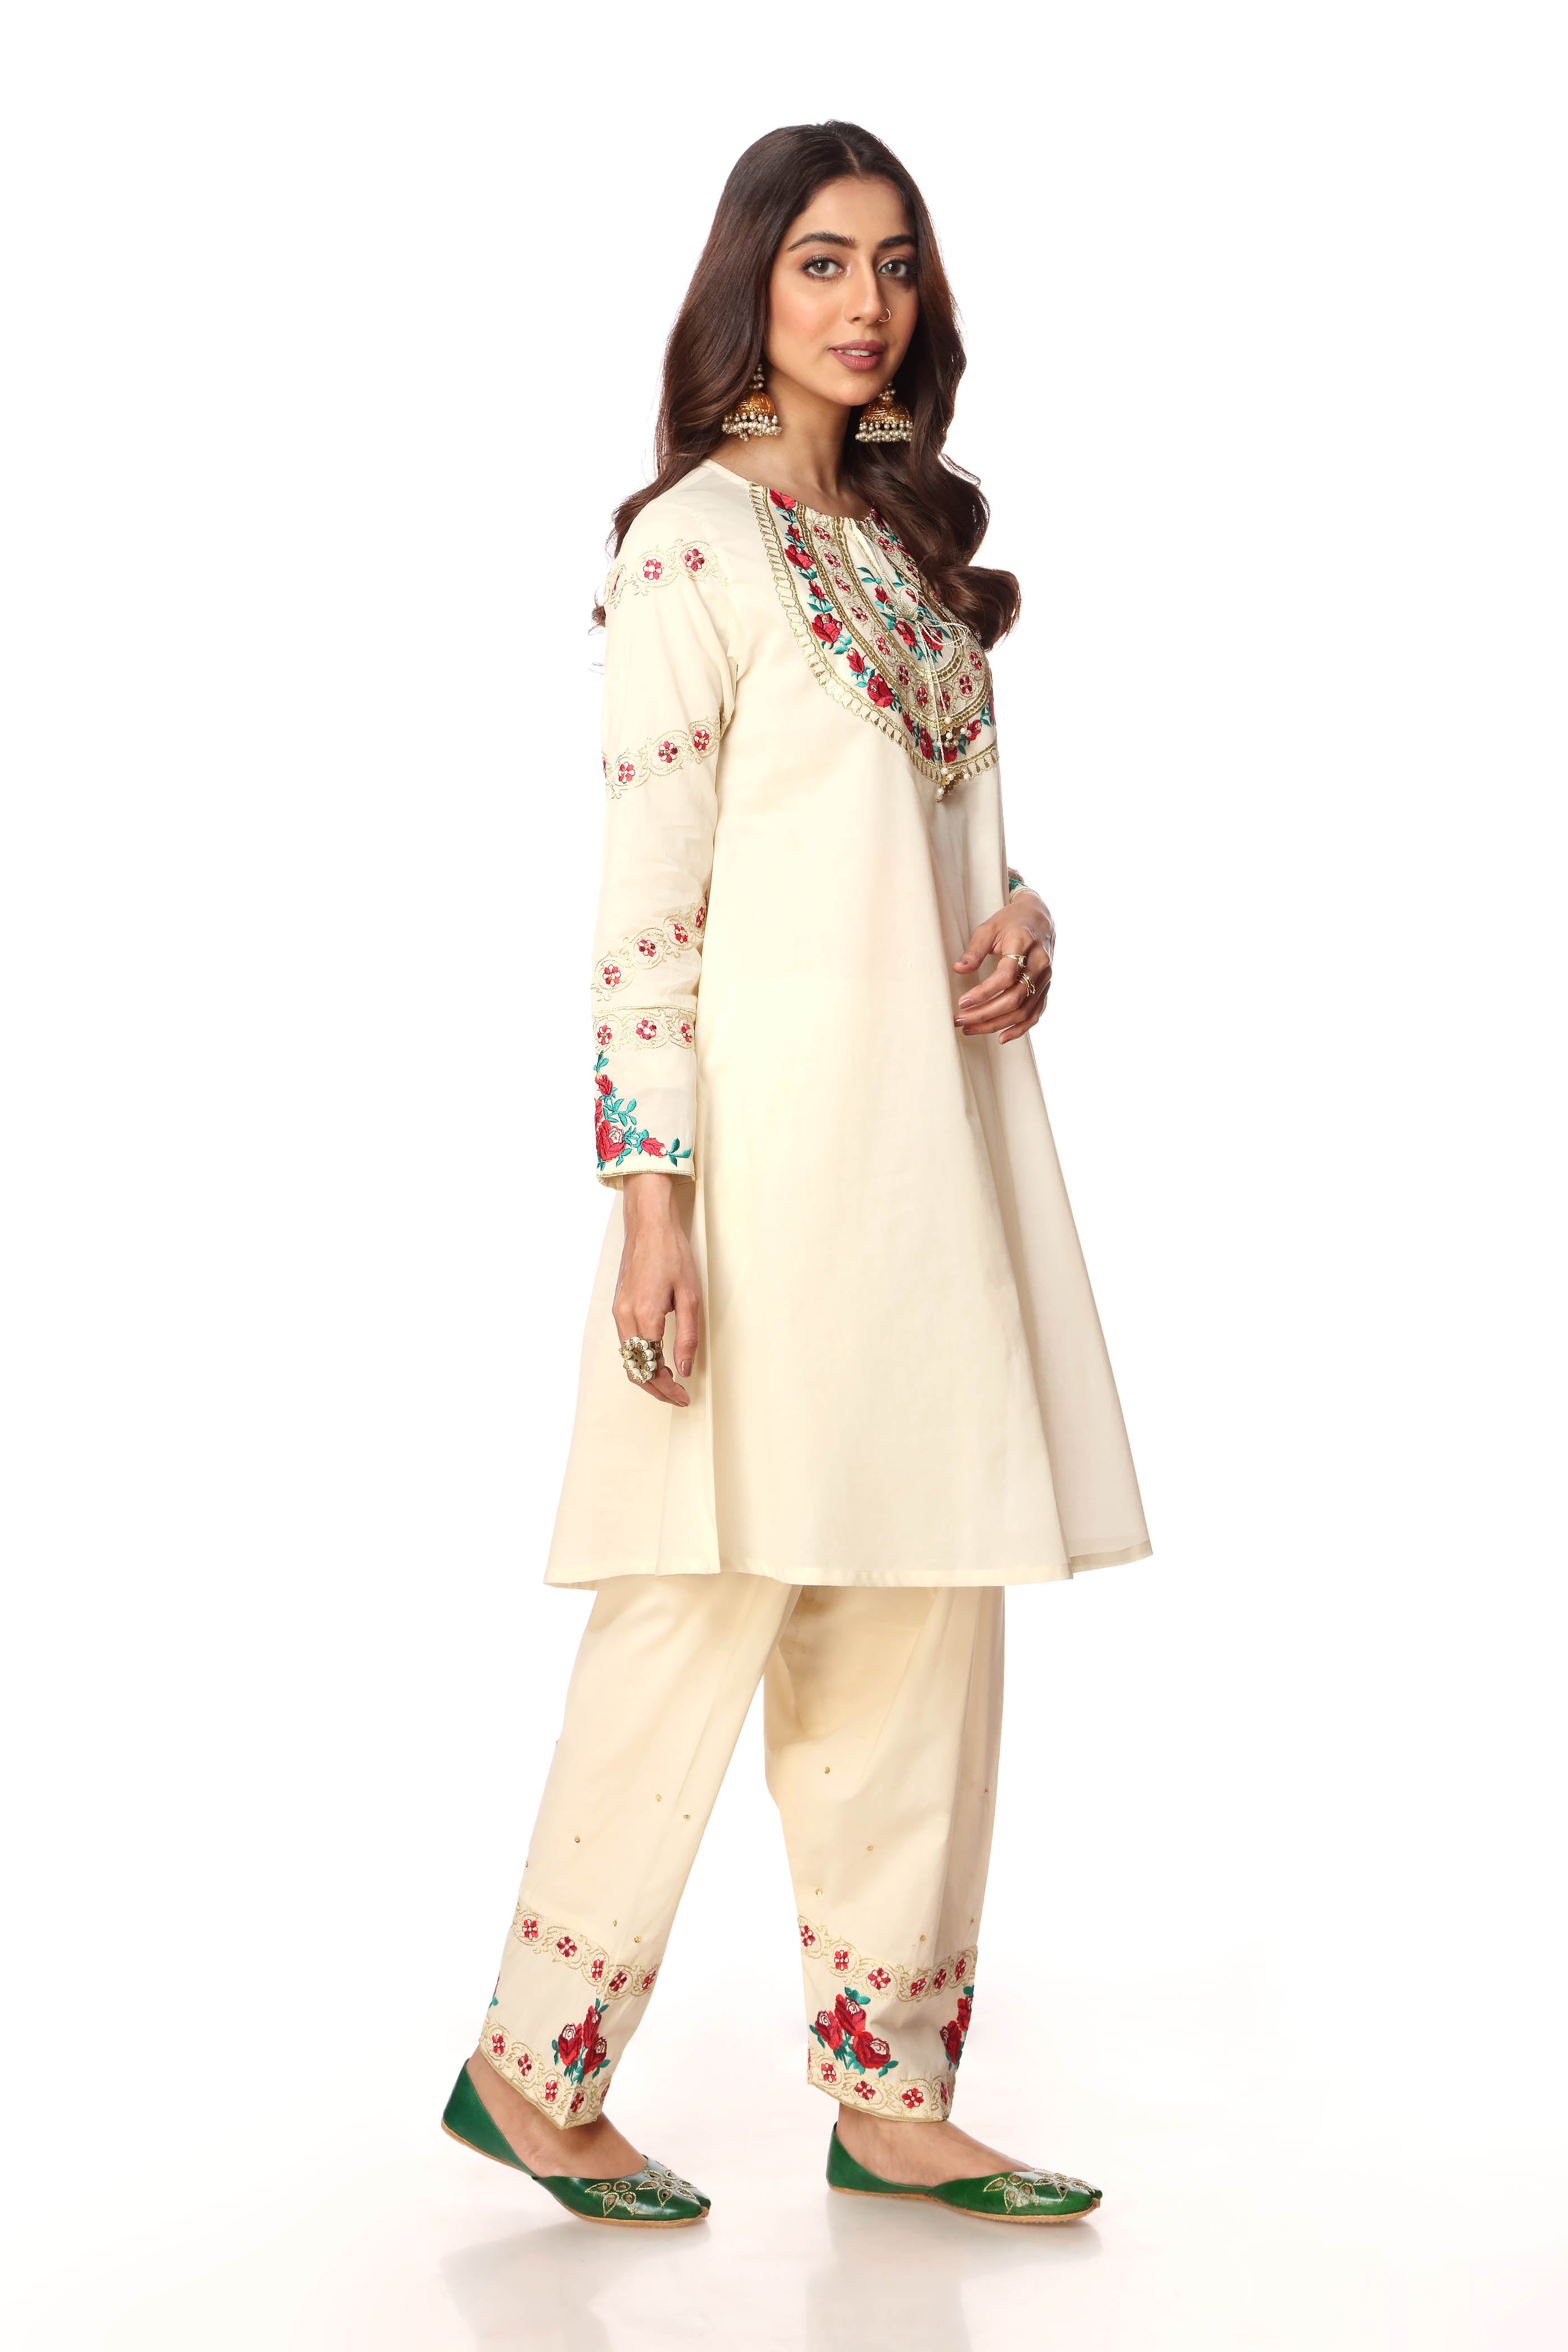 Rosey Gold in Off White coloured Printed Lawn fabric 2